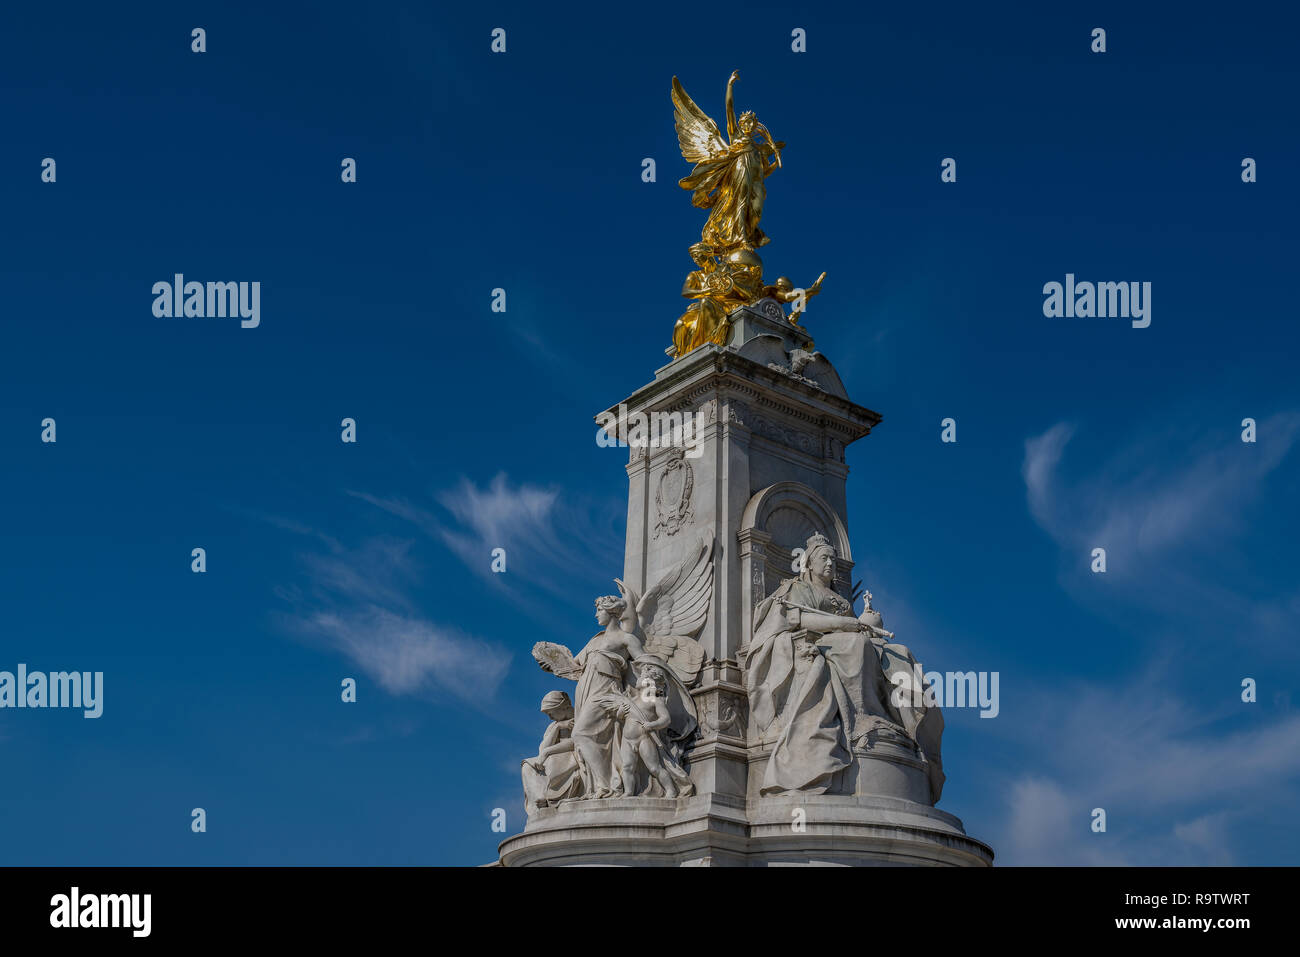 Statue of Queen Victoria, Buckingham Palace, London, England Stock Photo